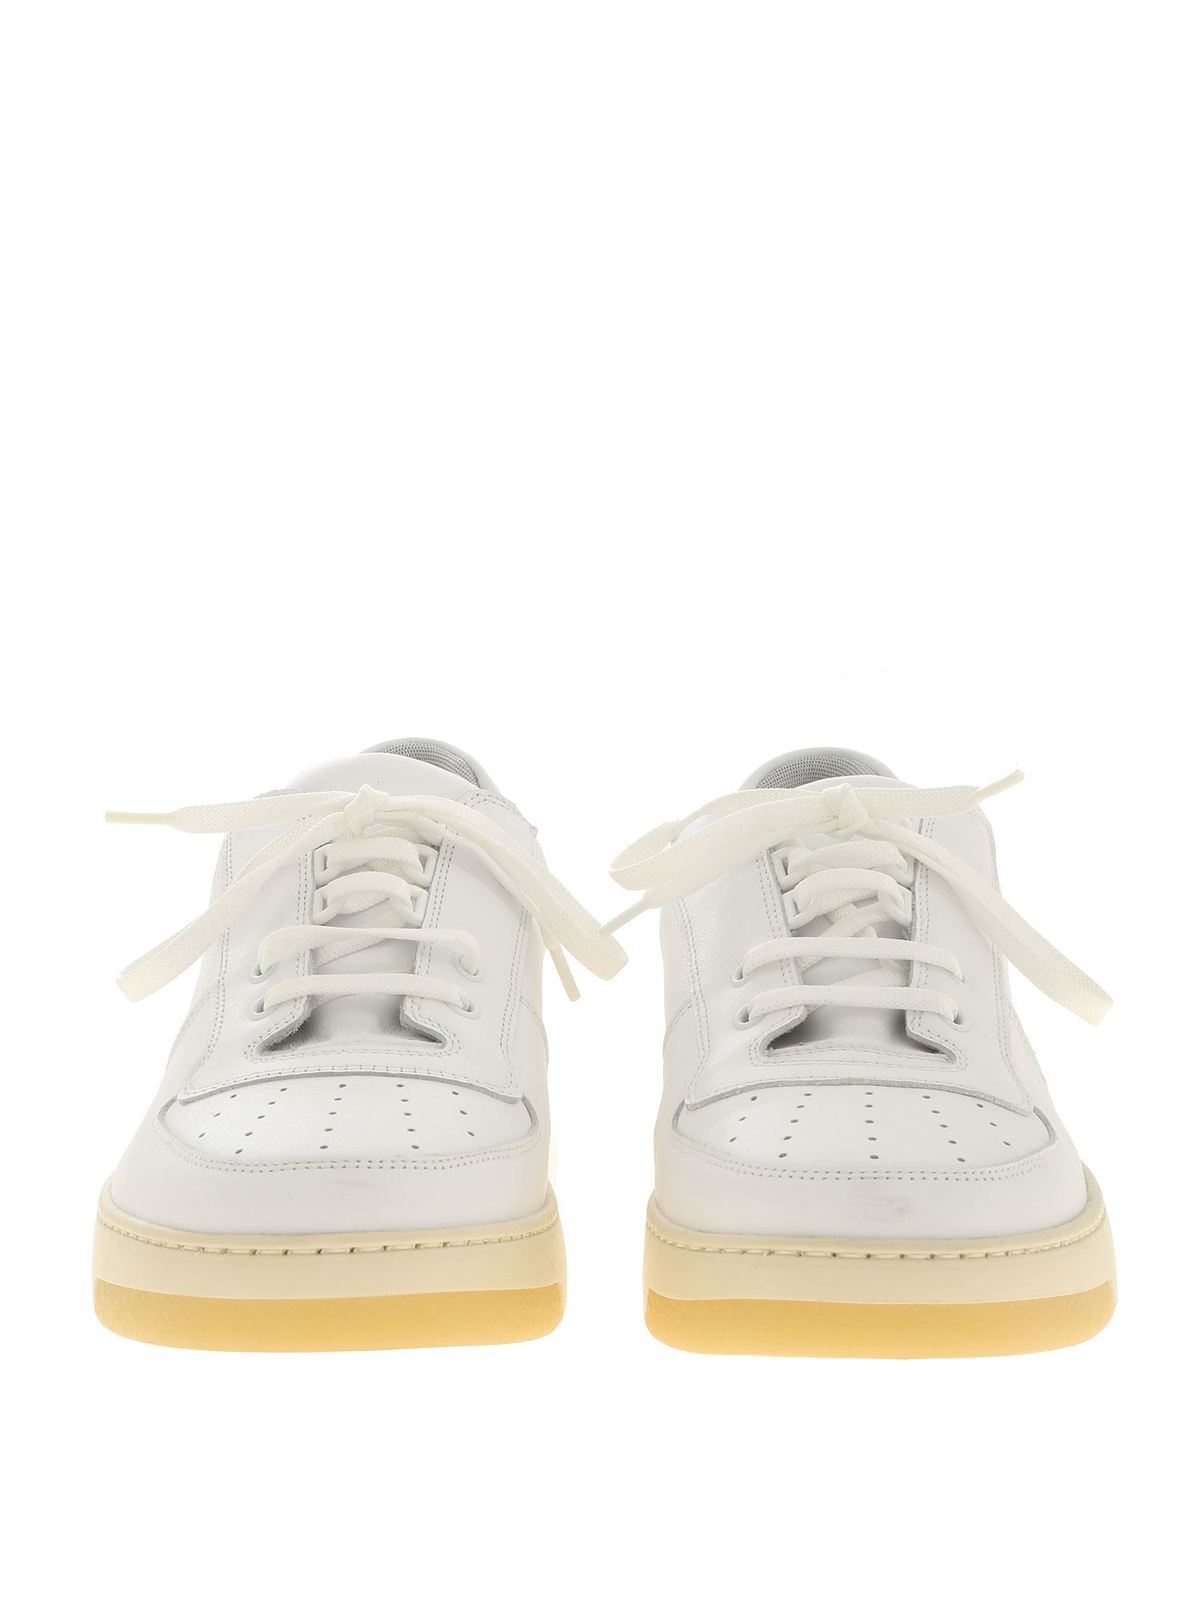 Trainers Acne Studios - sneakers in white - BD0011WHITE